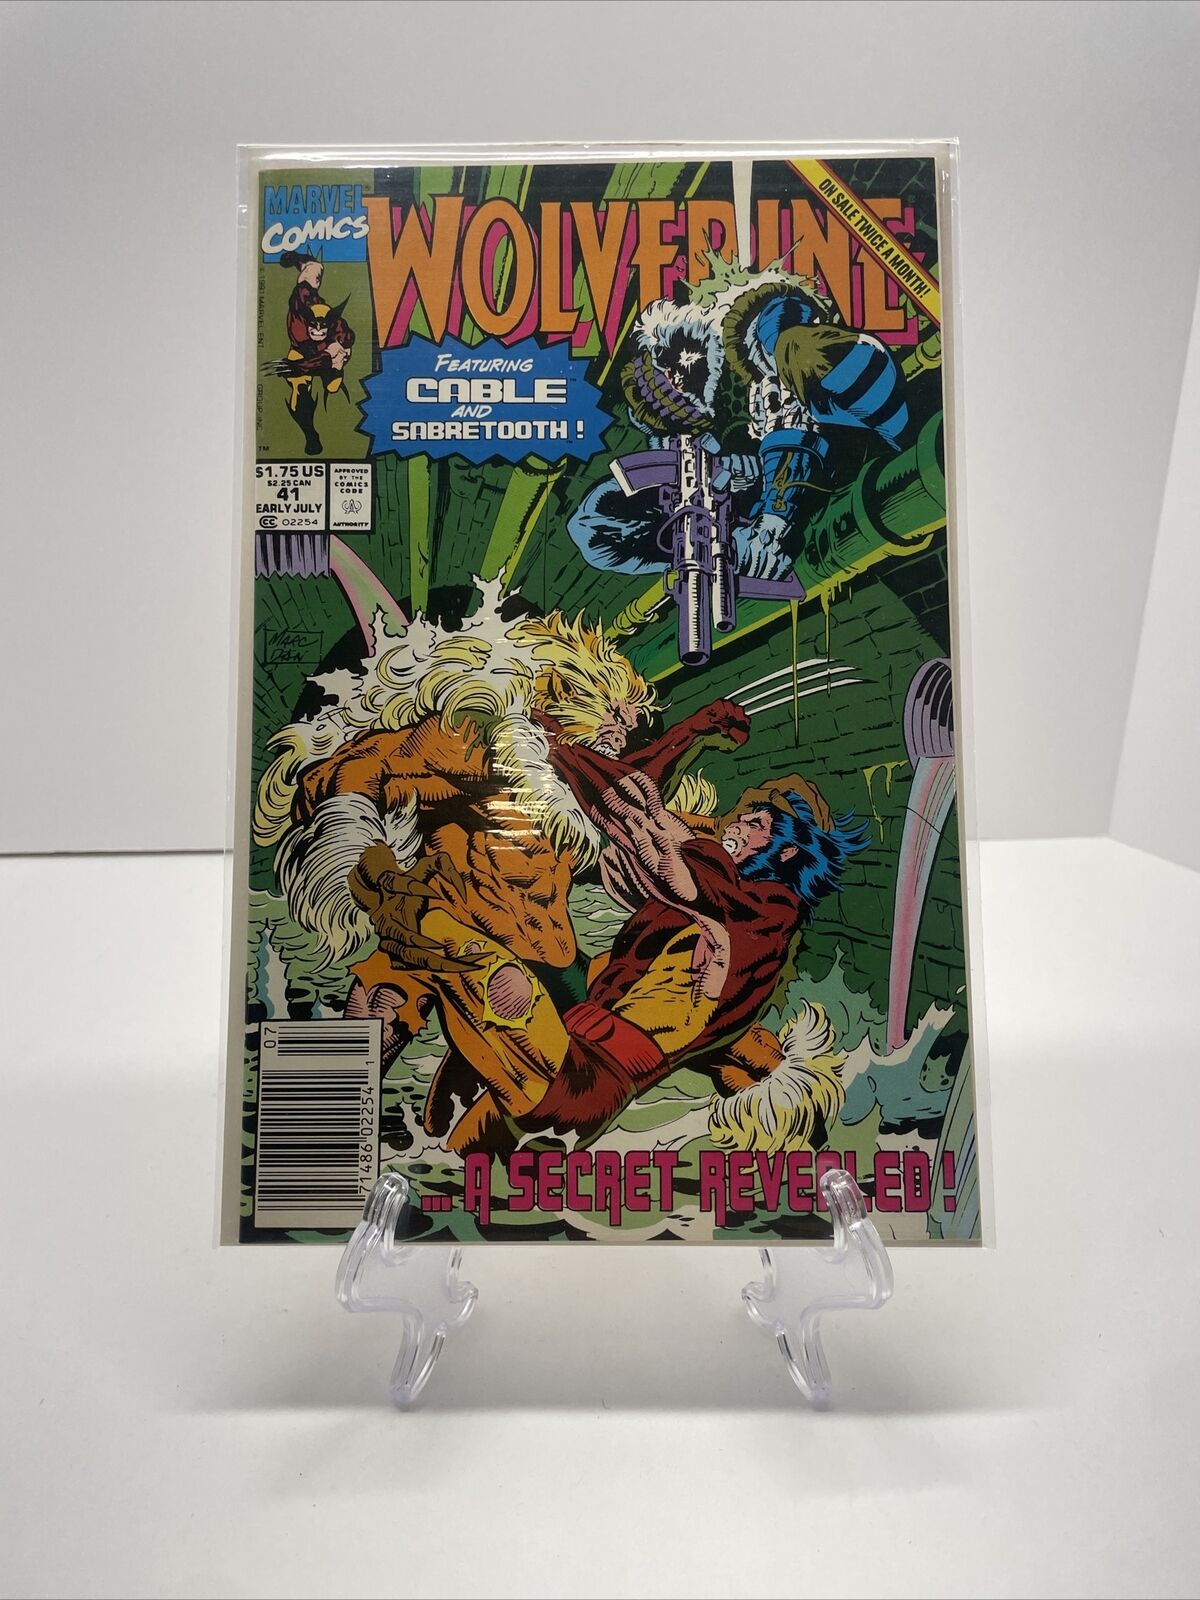 Wolverine #41 July 1991 Newsstand Cover Marvel Comic Book Volume 2